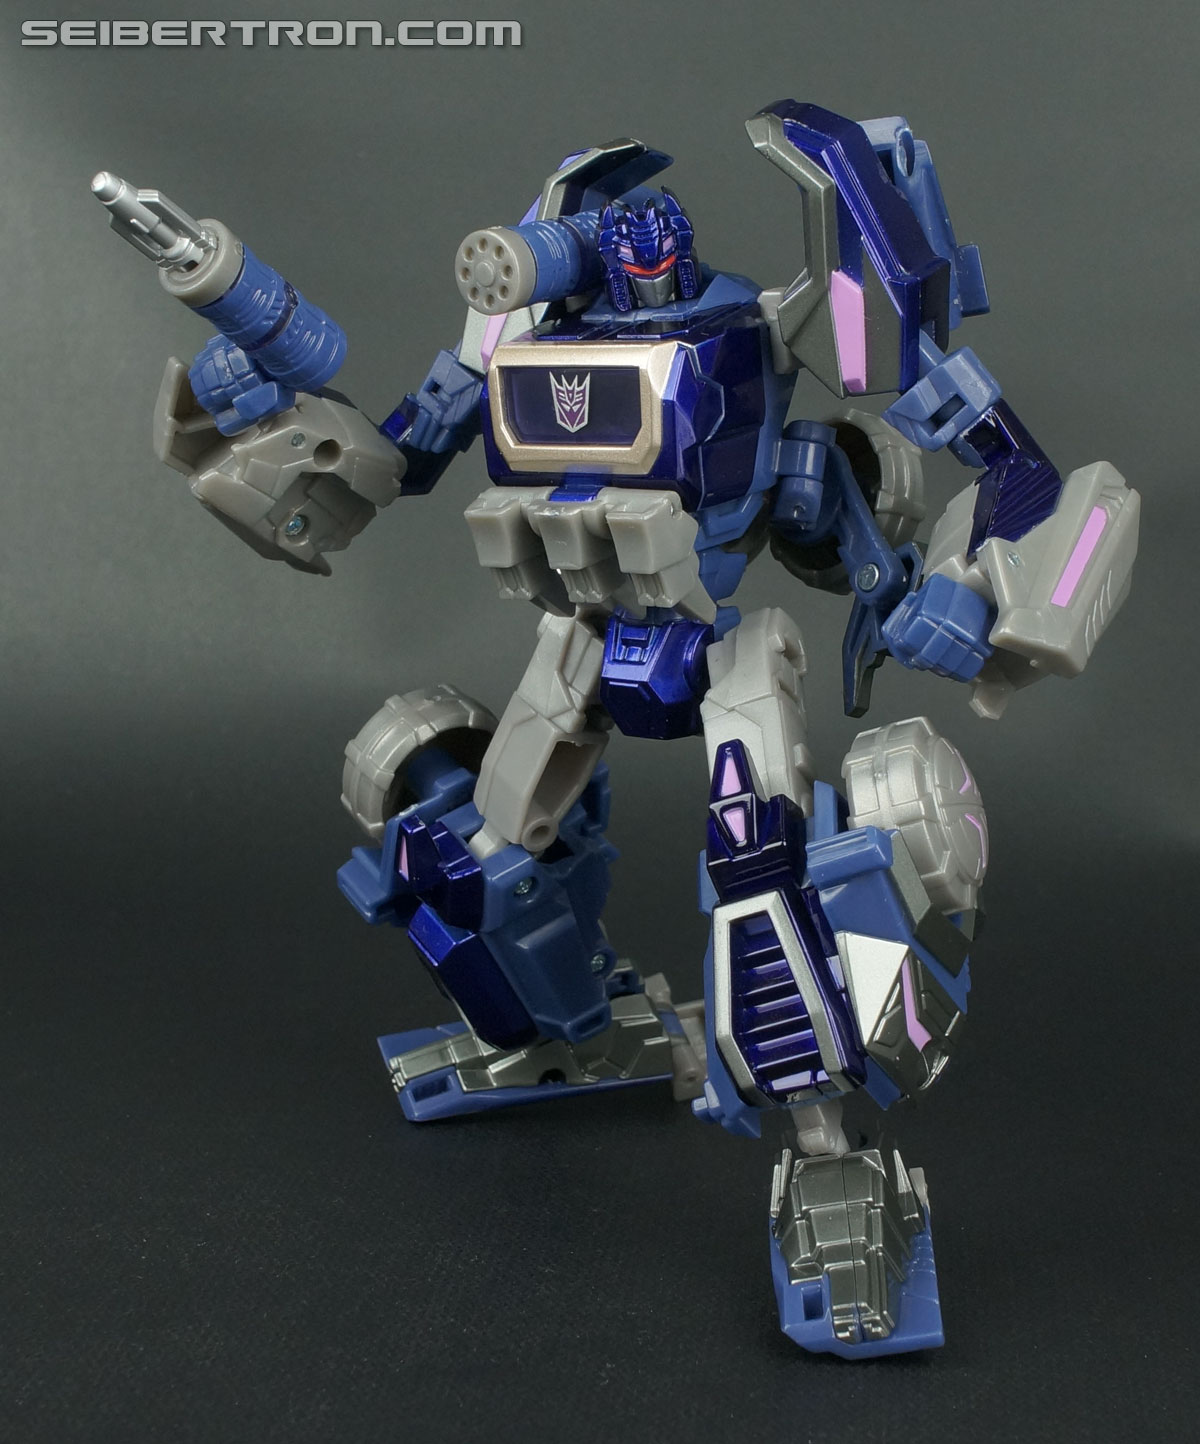 Transformers United Soundwave Cybertron Mode (Image #83 of 103)